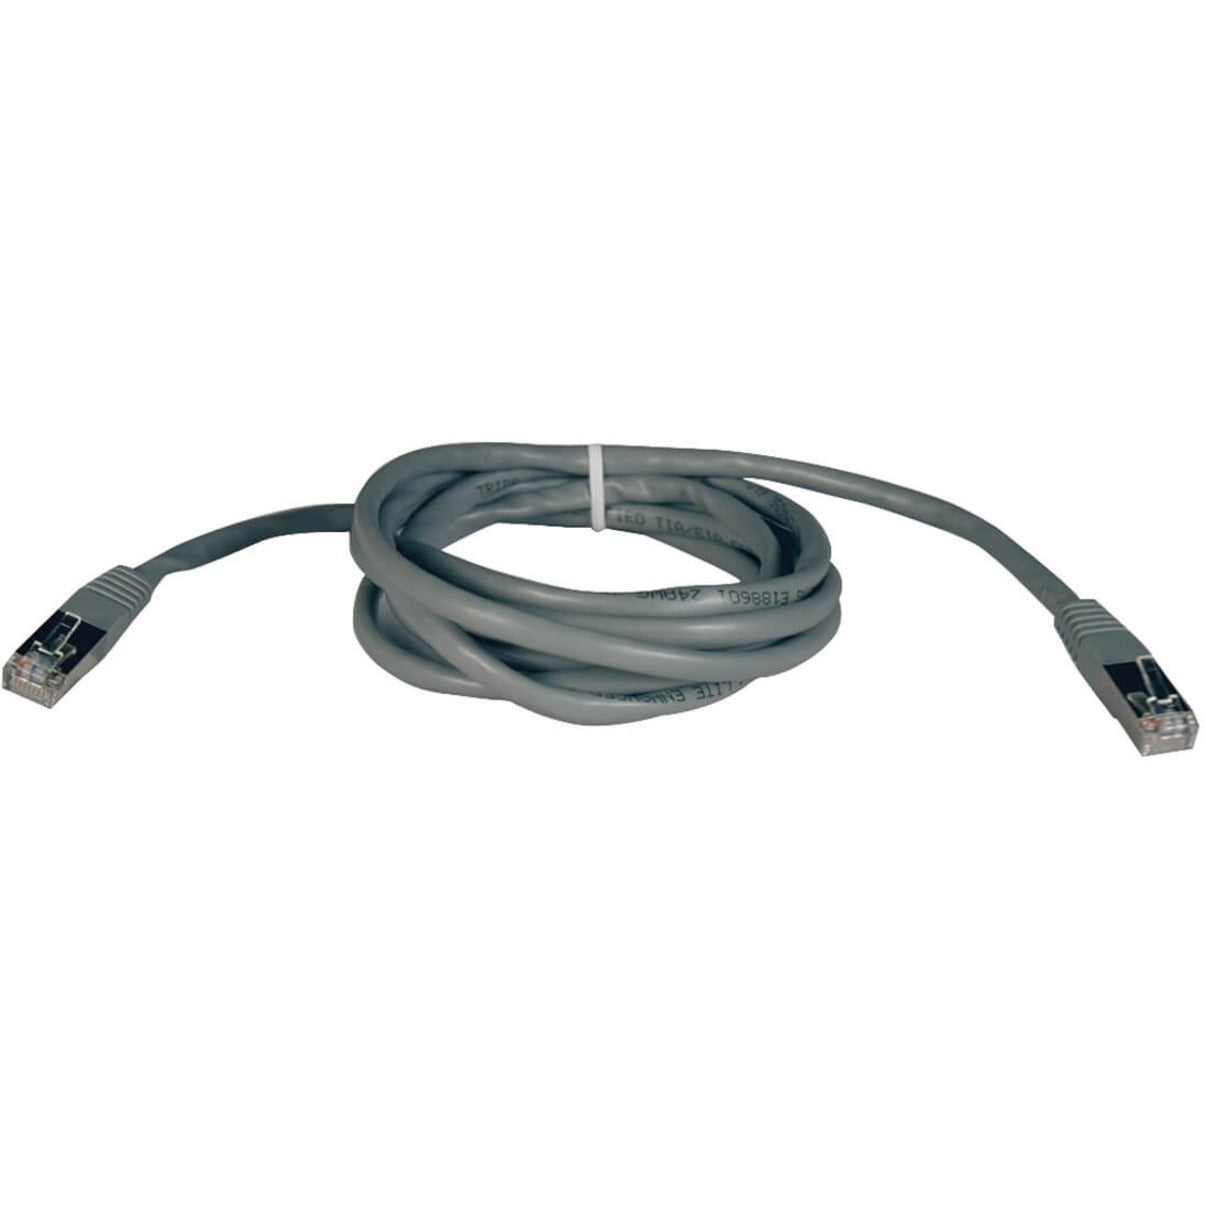 Tripp Lite N105-007-GY Cat5e STP Patch Cable, 7ft Gray Molded Shielded Patch Cable